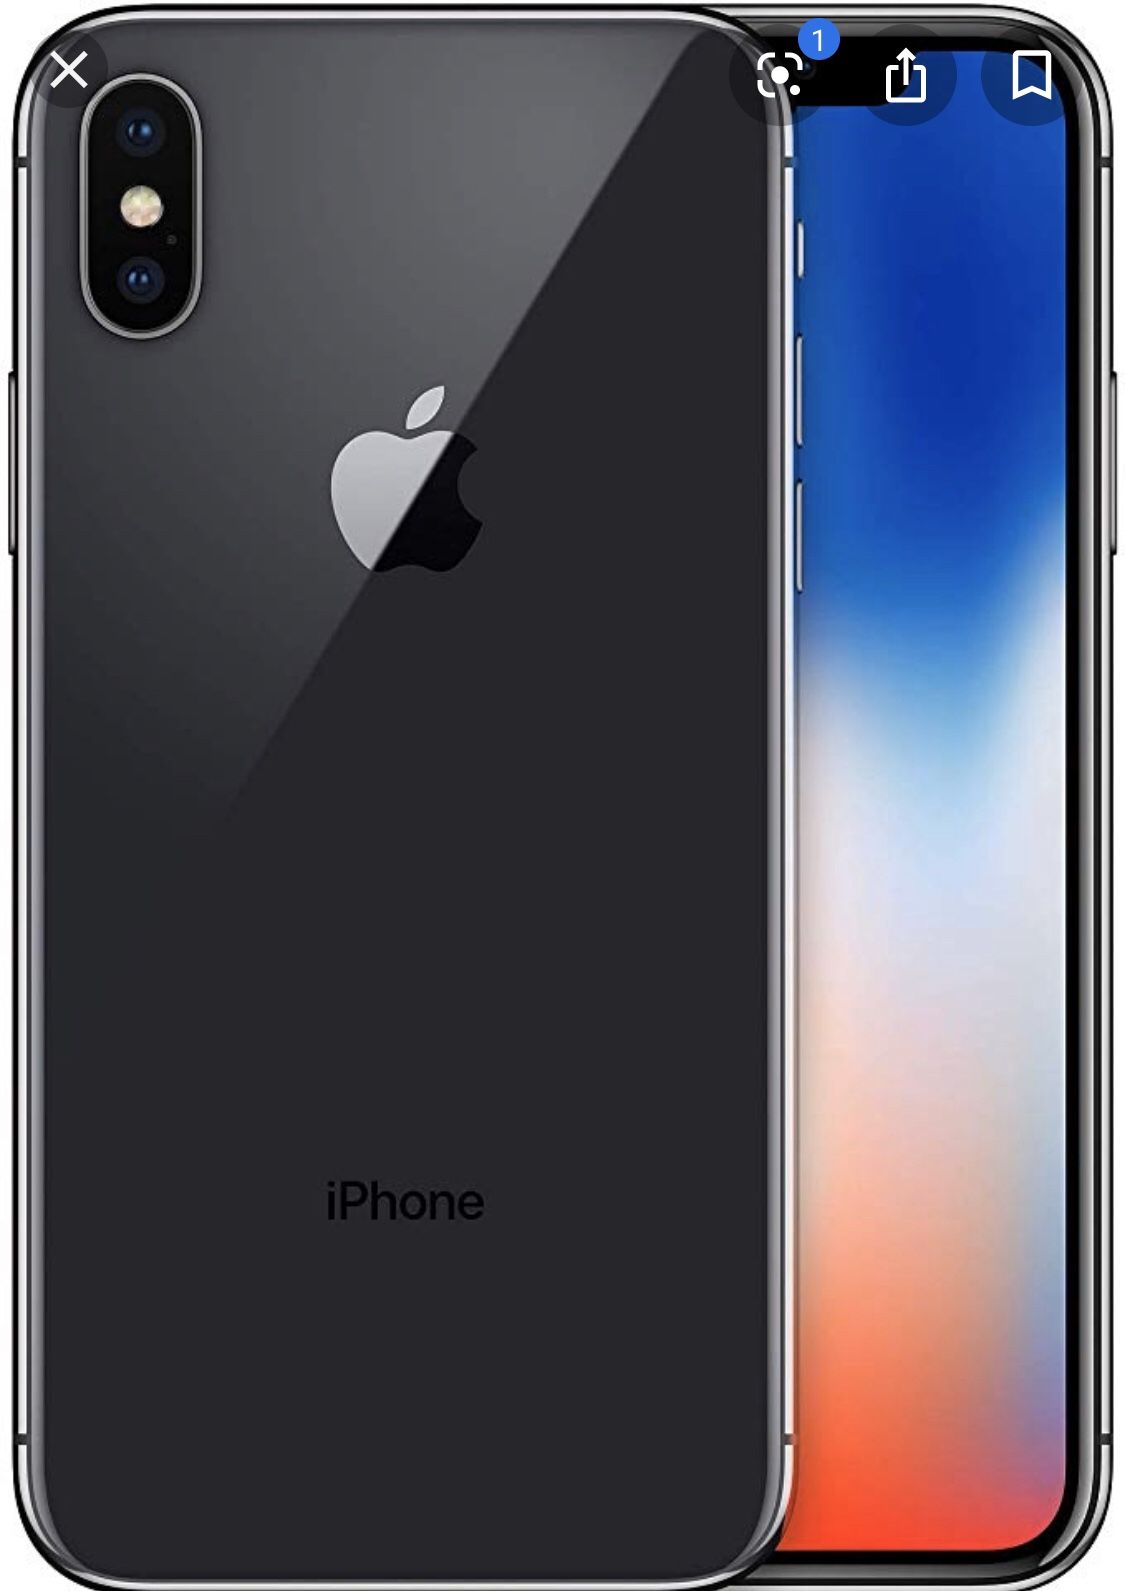 iPhone X 256 gig factory unlocked with all carriers